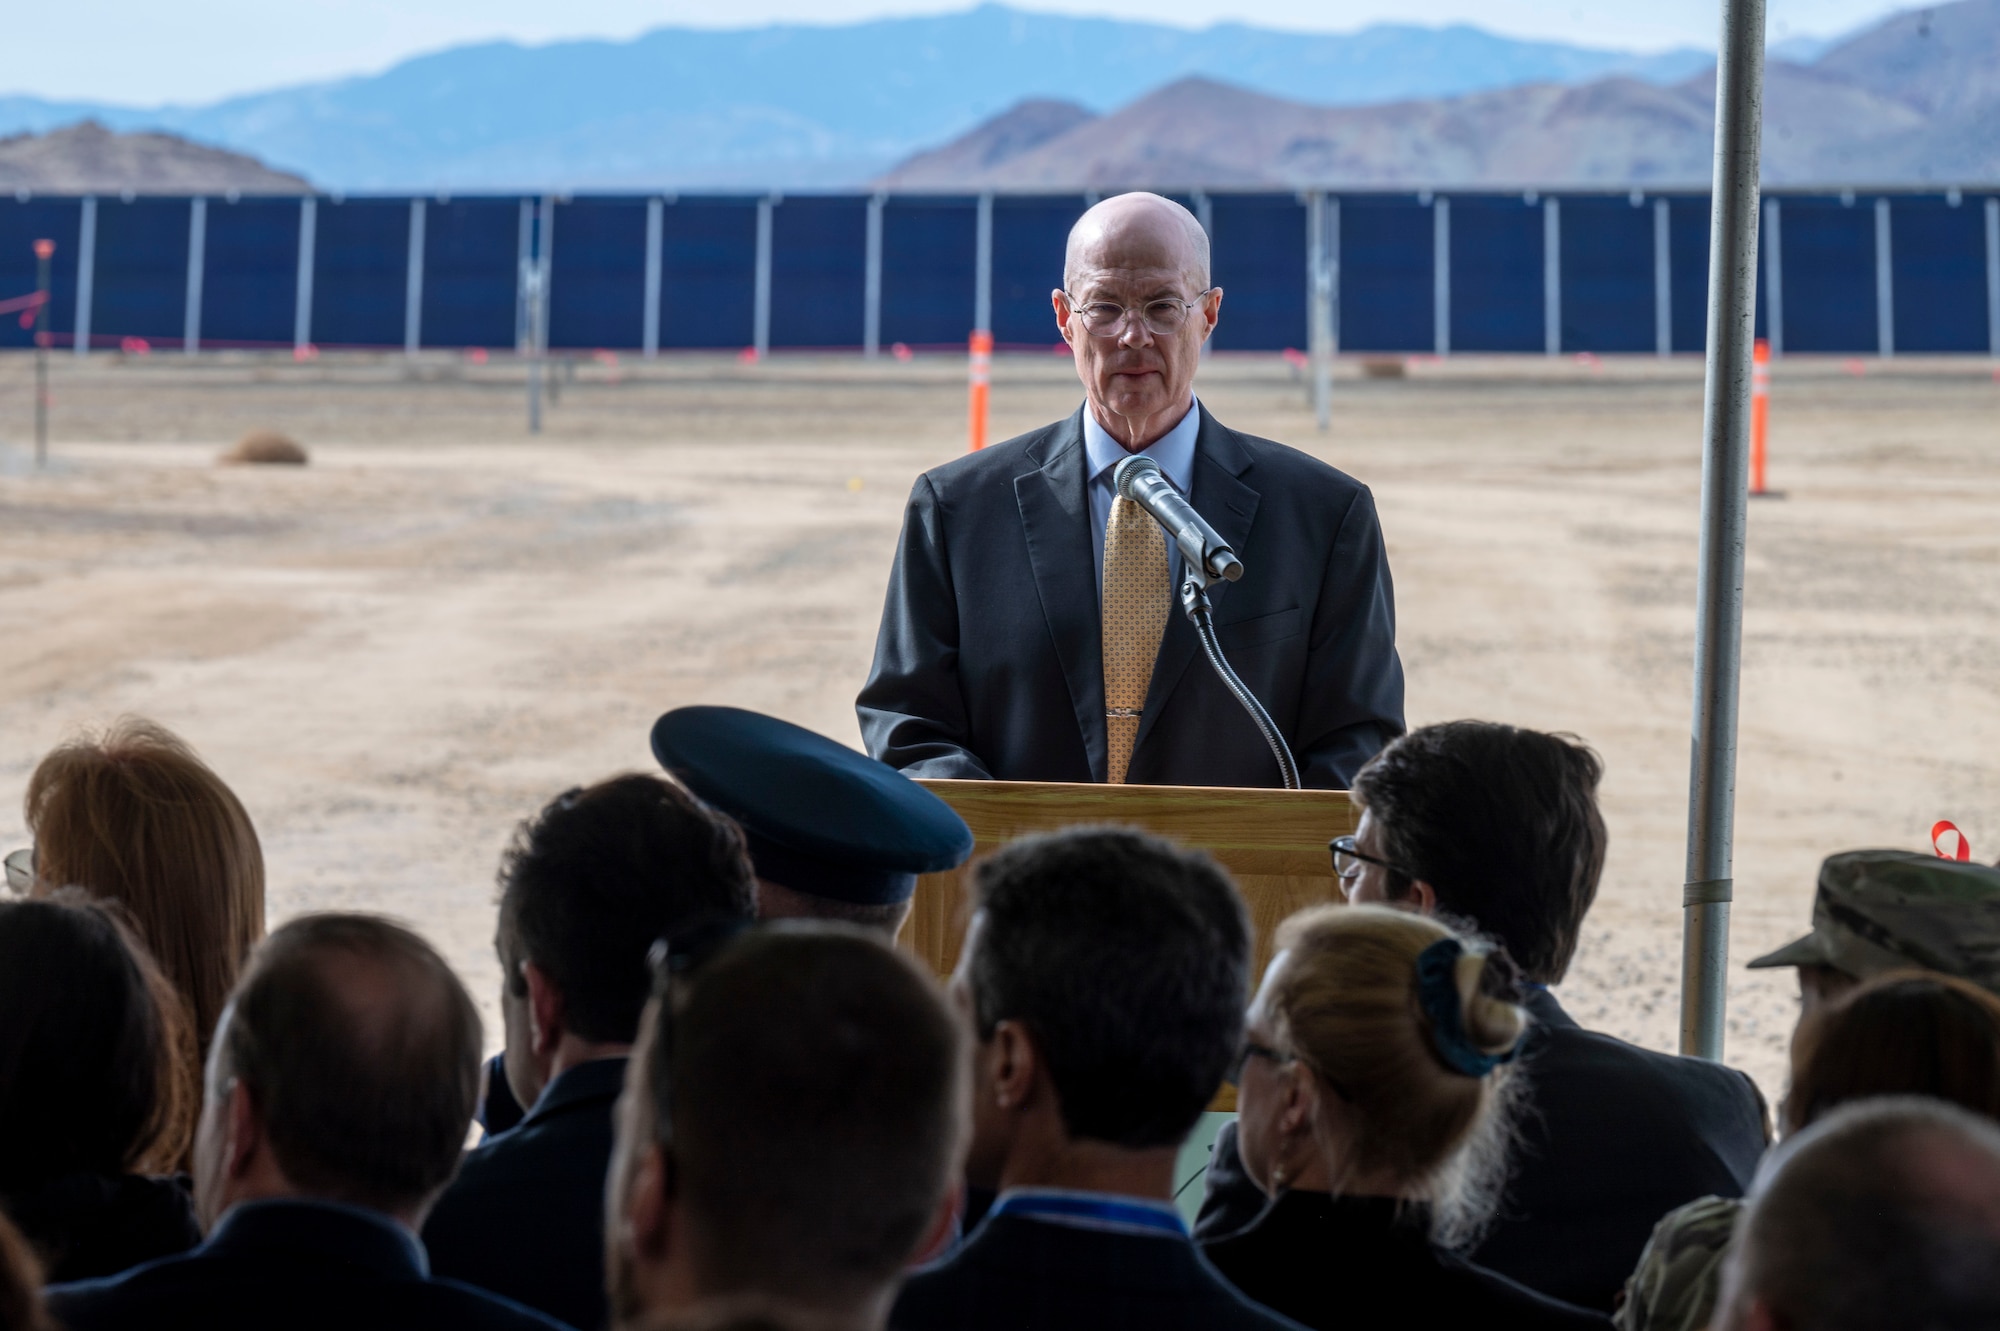 James Judkins, Director, 412th Civil Engineering Group speaks at the Edwards Solar Enhanced Use Lease Project ribbon cutting ceremony commemorating the largest private-public collaboration in Department of Defense history at Edwards Air Force Base, California, Feb. 2.